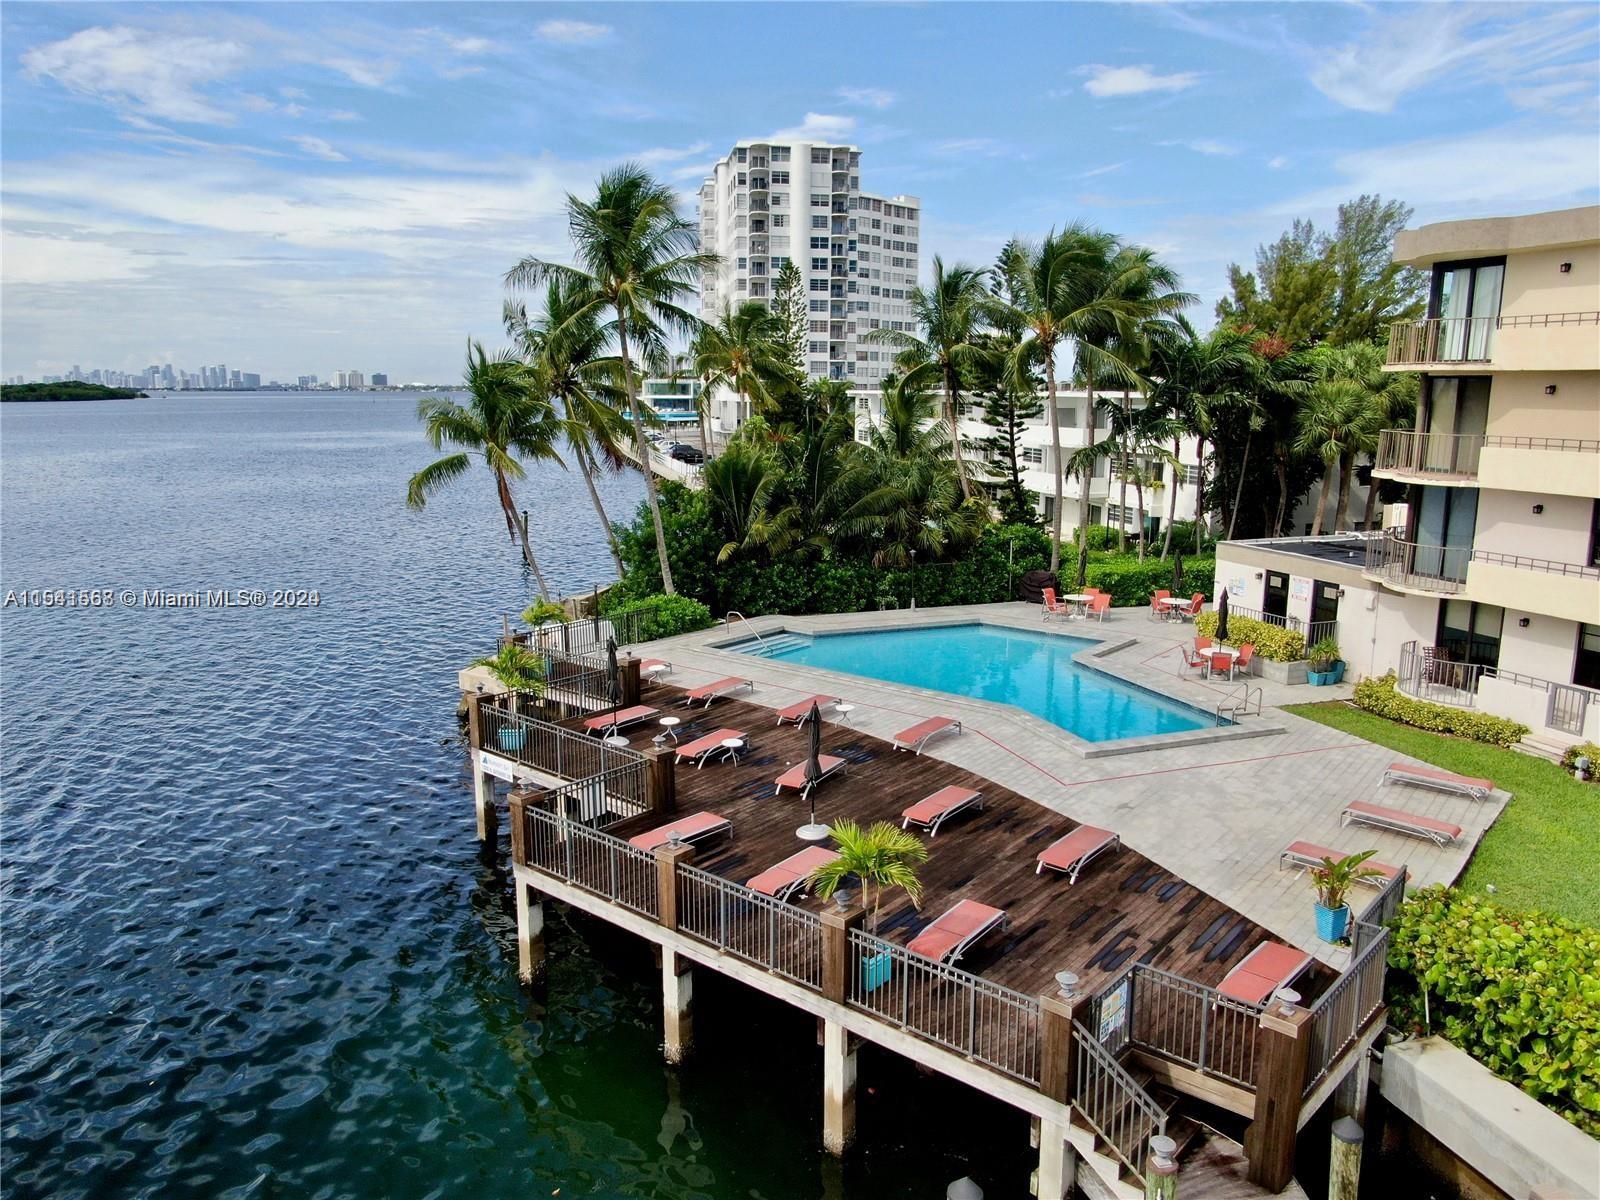 Welcome Home - Hard to find, beautiful and spacious 3 Bedroom/2.5 Bath on the water. This lovely 3/2.5 condo is located in the highly sought-after Mariner's Bay Condominium on the North Miami intercoastal. Beautiful 4-story building, immaculate landscaping, security, gated grounds, with a bayside pool, exercise room, club room, sauna/steam spa room, and more! Home offers 2,145 sq ft. of living space with all bedrooms in a split layout, renovated kitchen with breakfast nook, spacious double balconies, washer/dryer in unit, and 2 assigned parking spaces. Nestled just minutes to great shopping, WholeFoods, Publix, Costco, Target, fresh markets, restaurants, parks, and Miami's best beaches. Your paradise awaits. Easy to show!